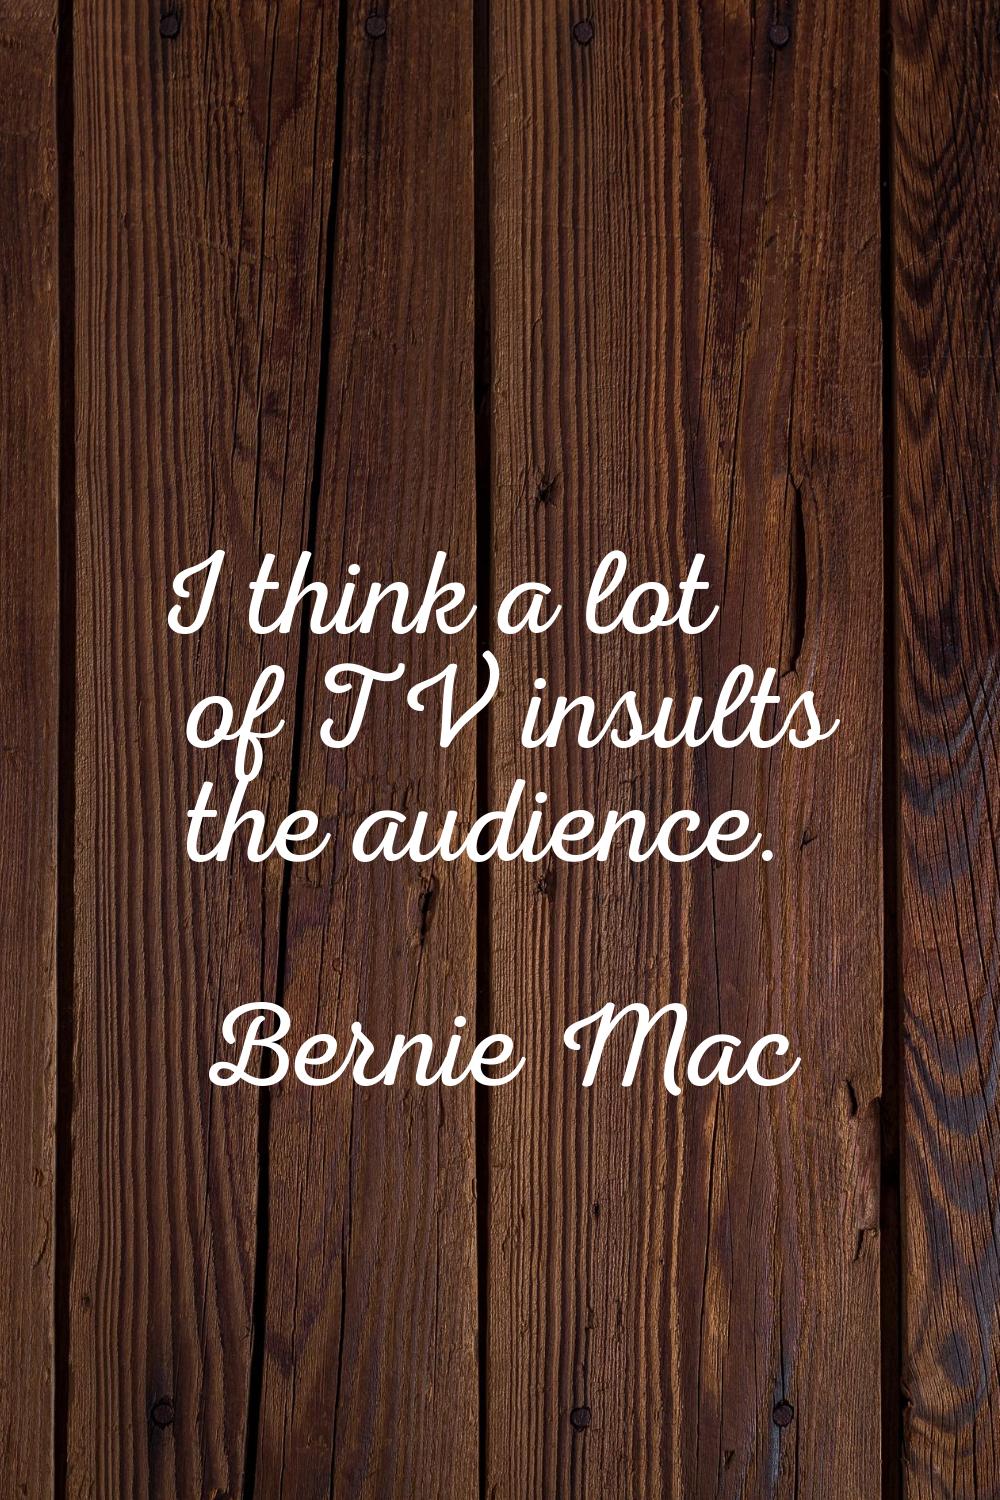 I think a lot of TV insults the audience.